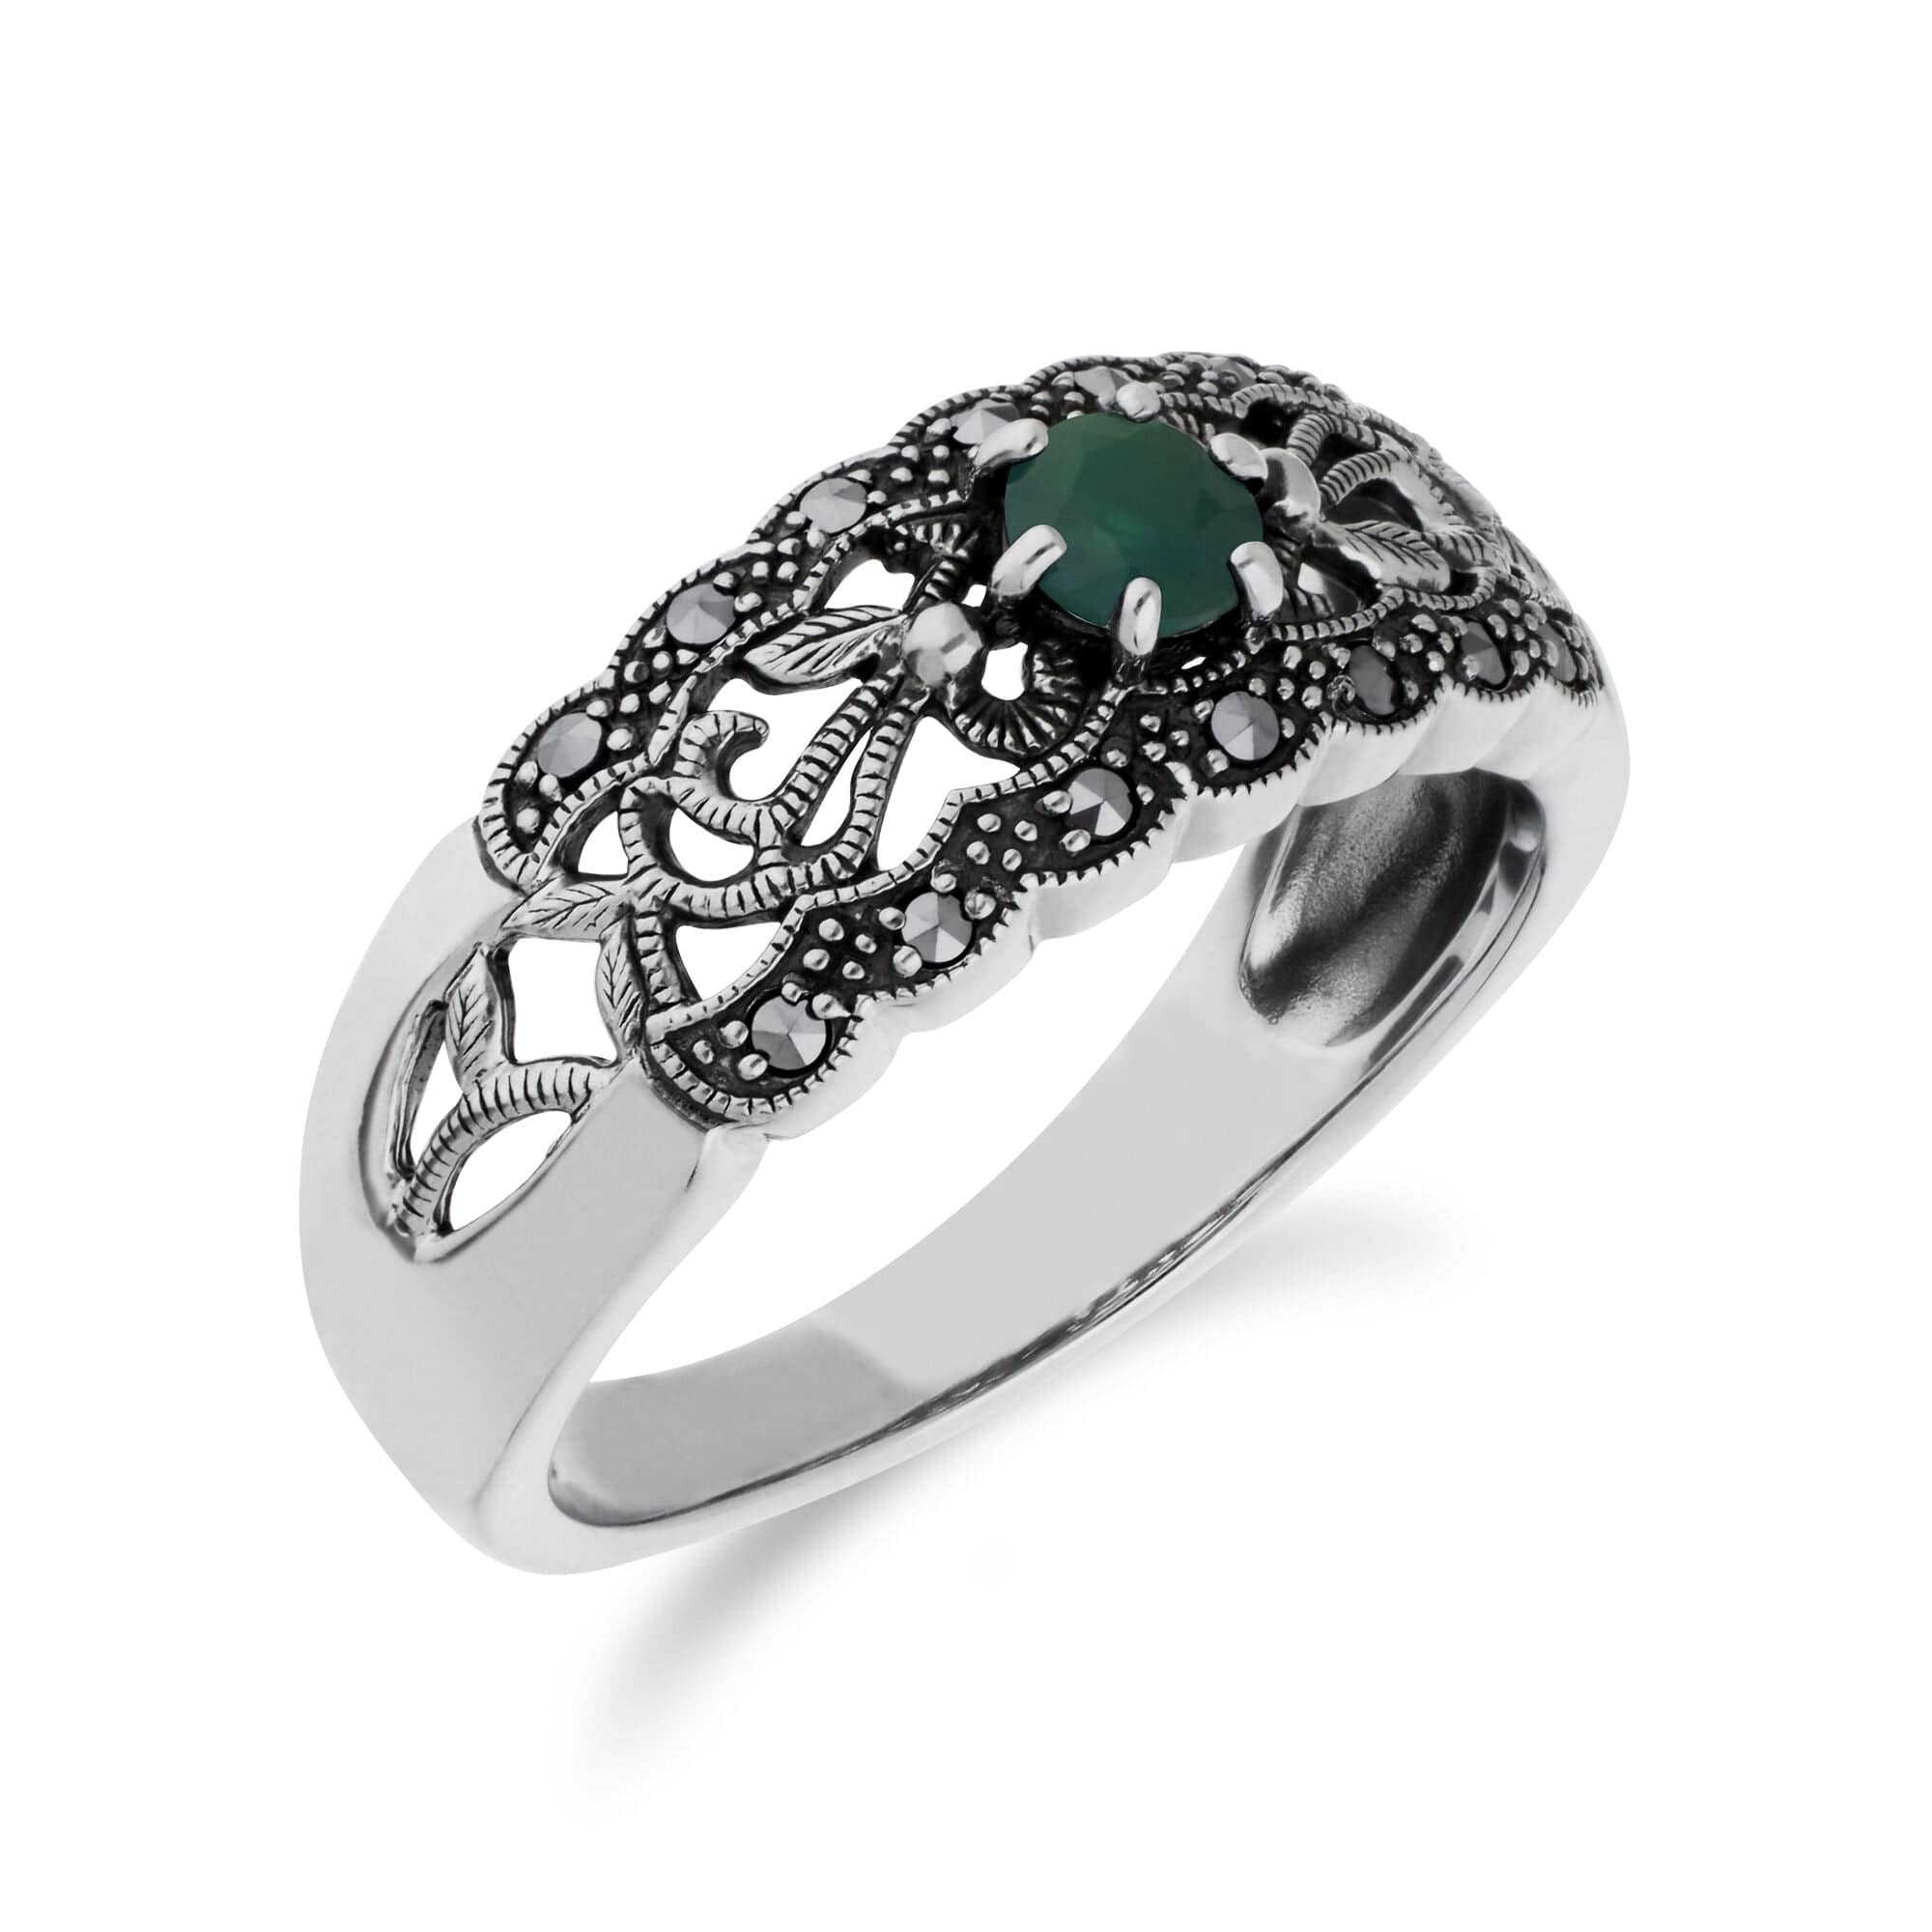 214R597706925 Art Nouveau Style Round Emerald & Marcasite Floral Band Ring in Sterling Silver 3